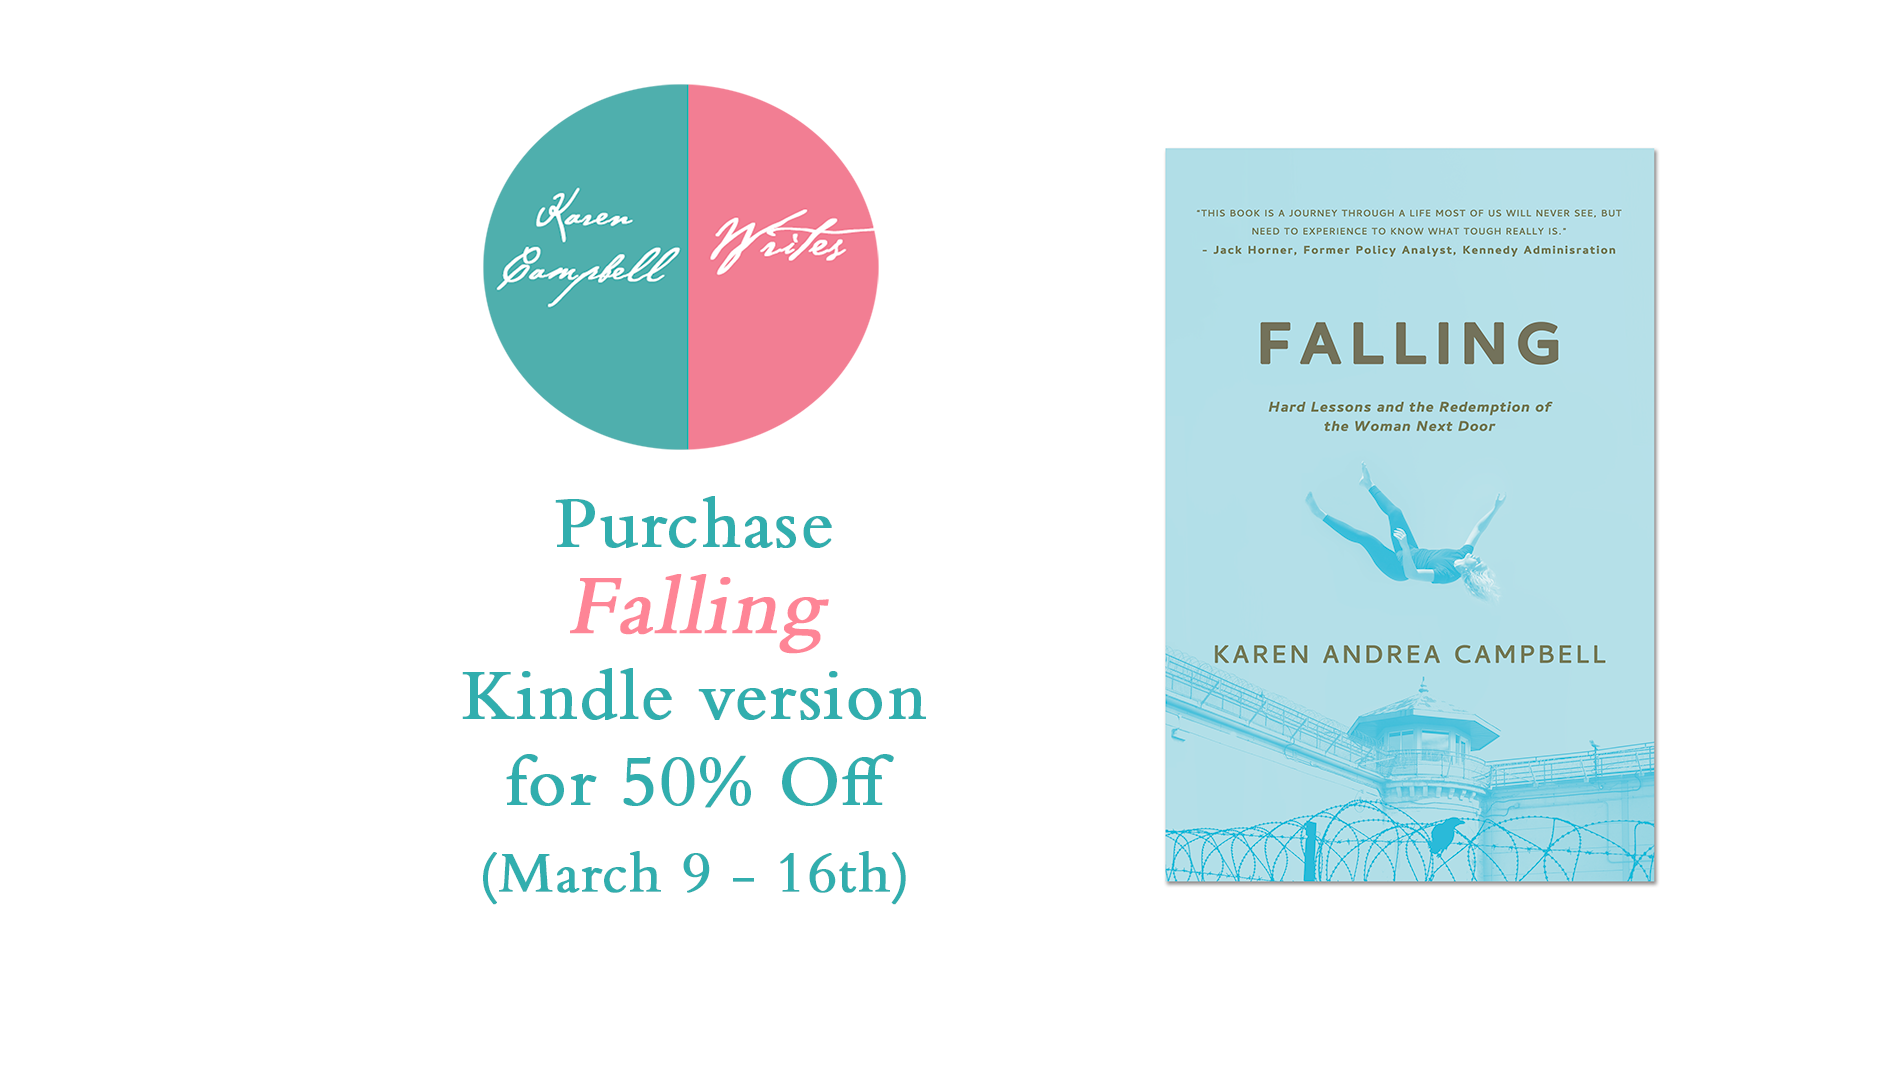 Kindle version of Falling Half Off Until May 16th